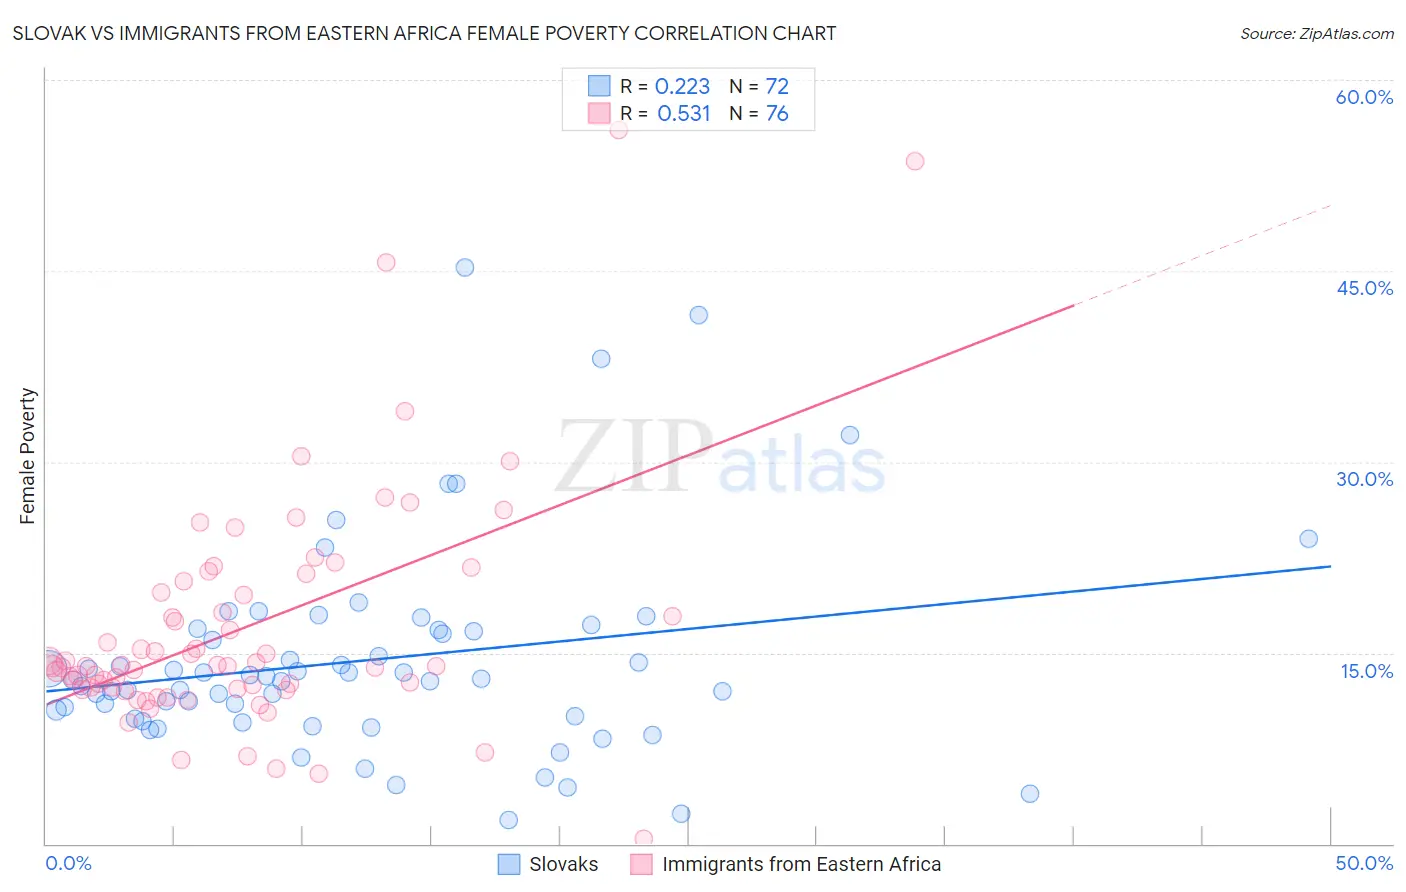 Slovak vs Immigrants from Eastern Africa Female Poverty